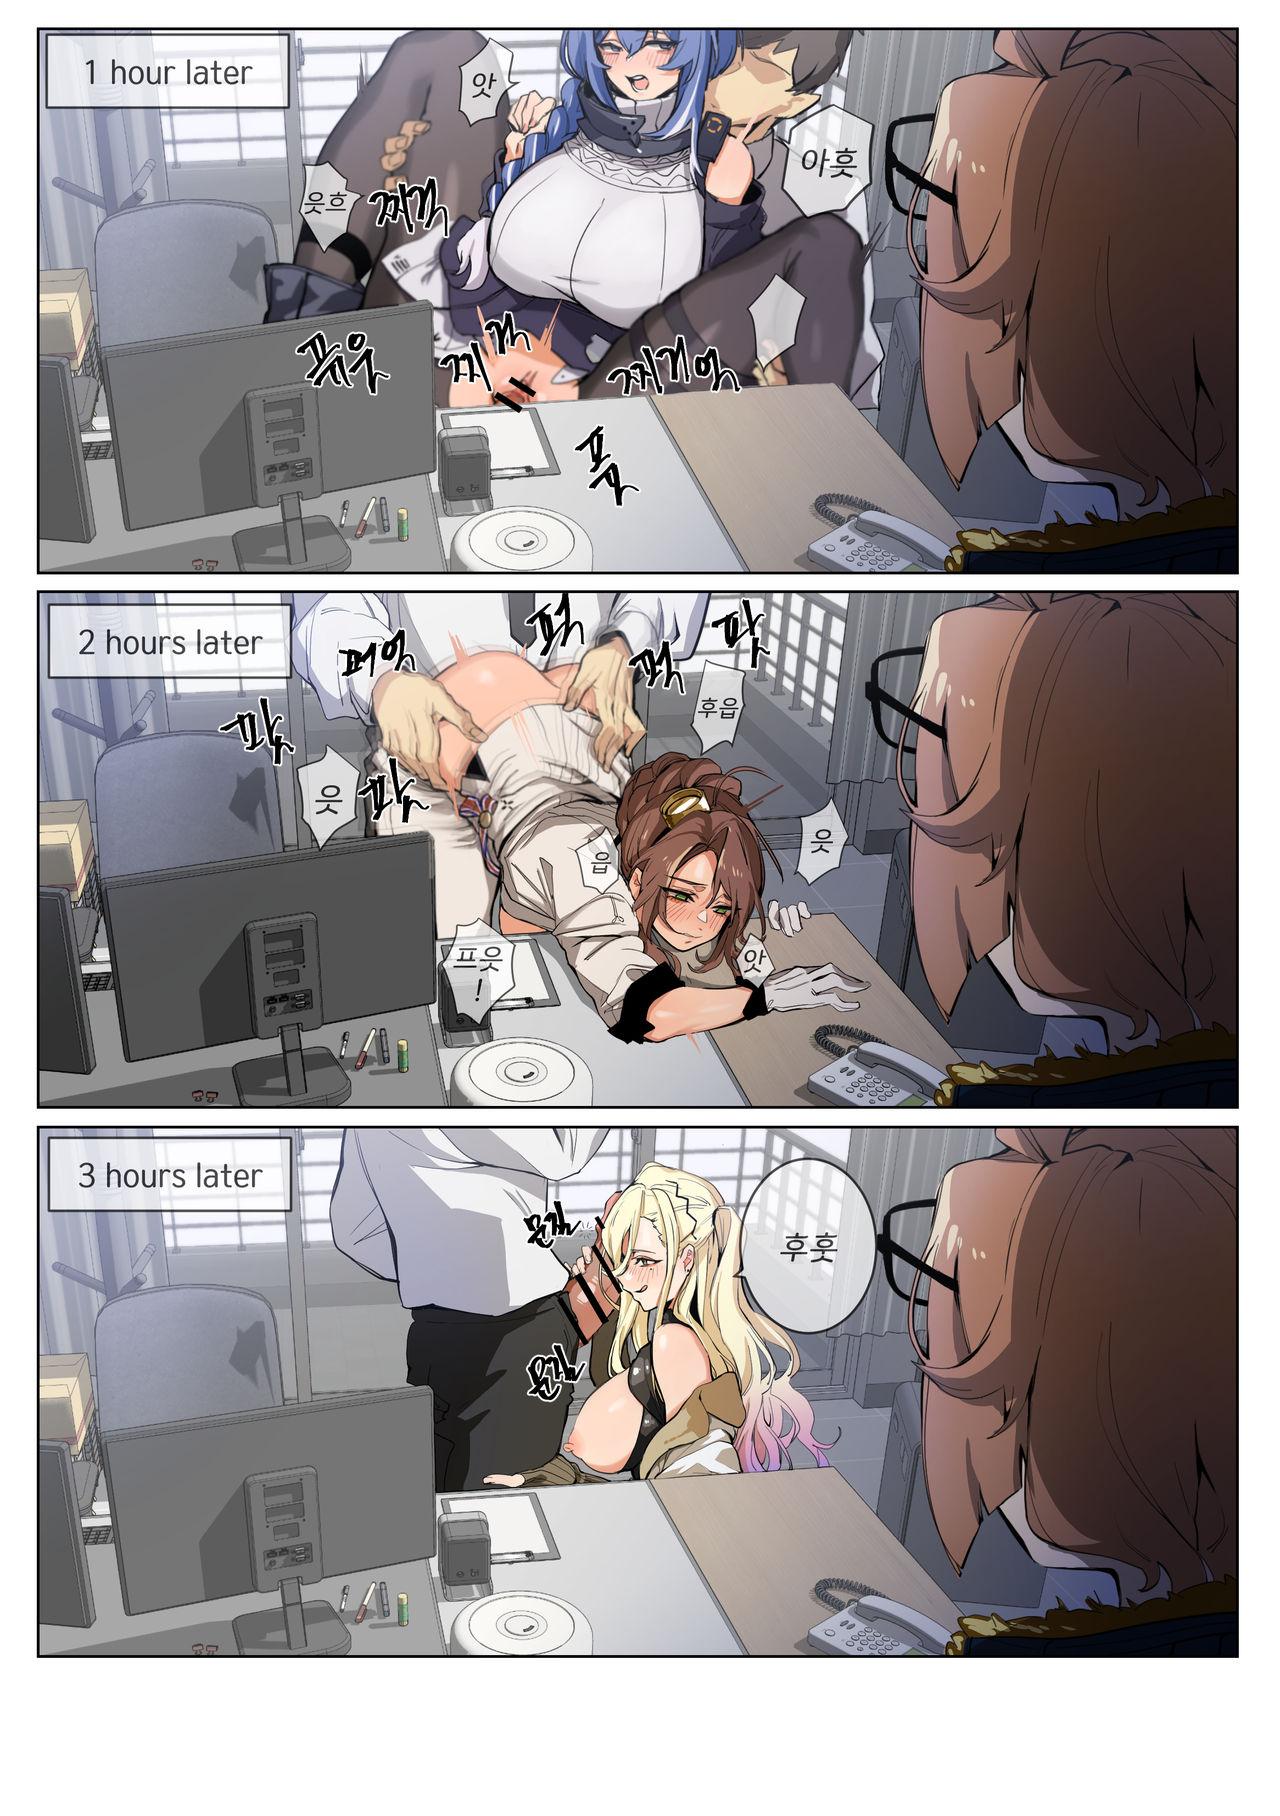 Trio Grizzly - Girls frontline Gay - Page 4